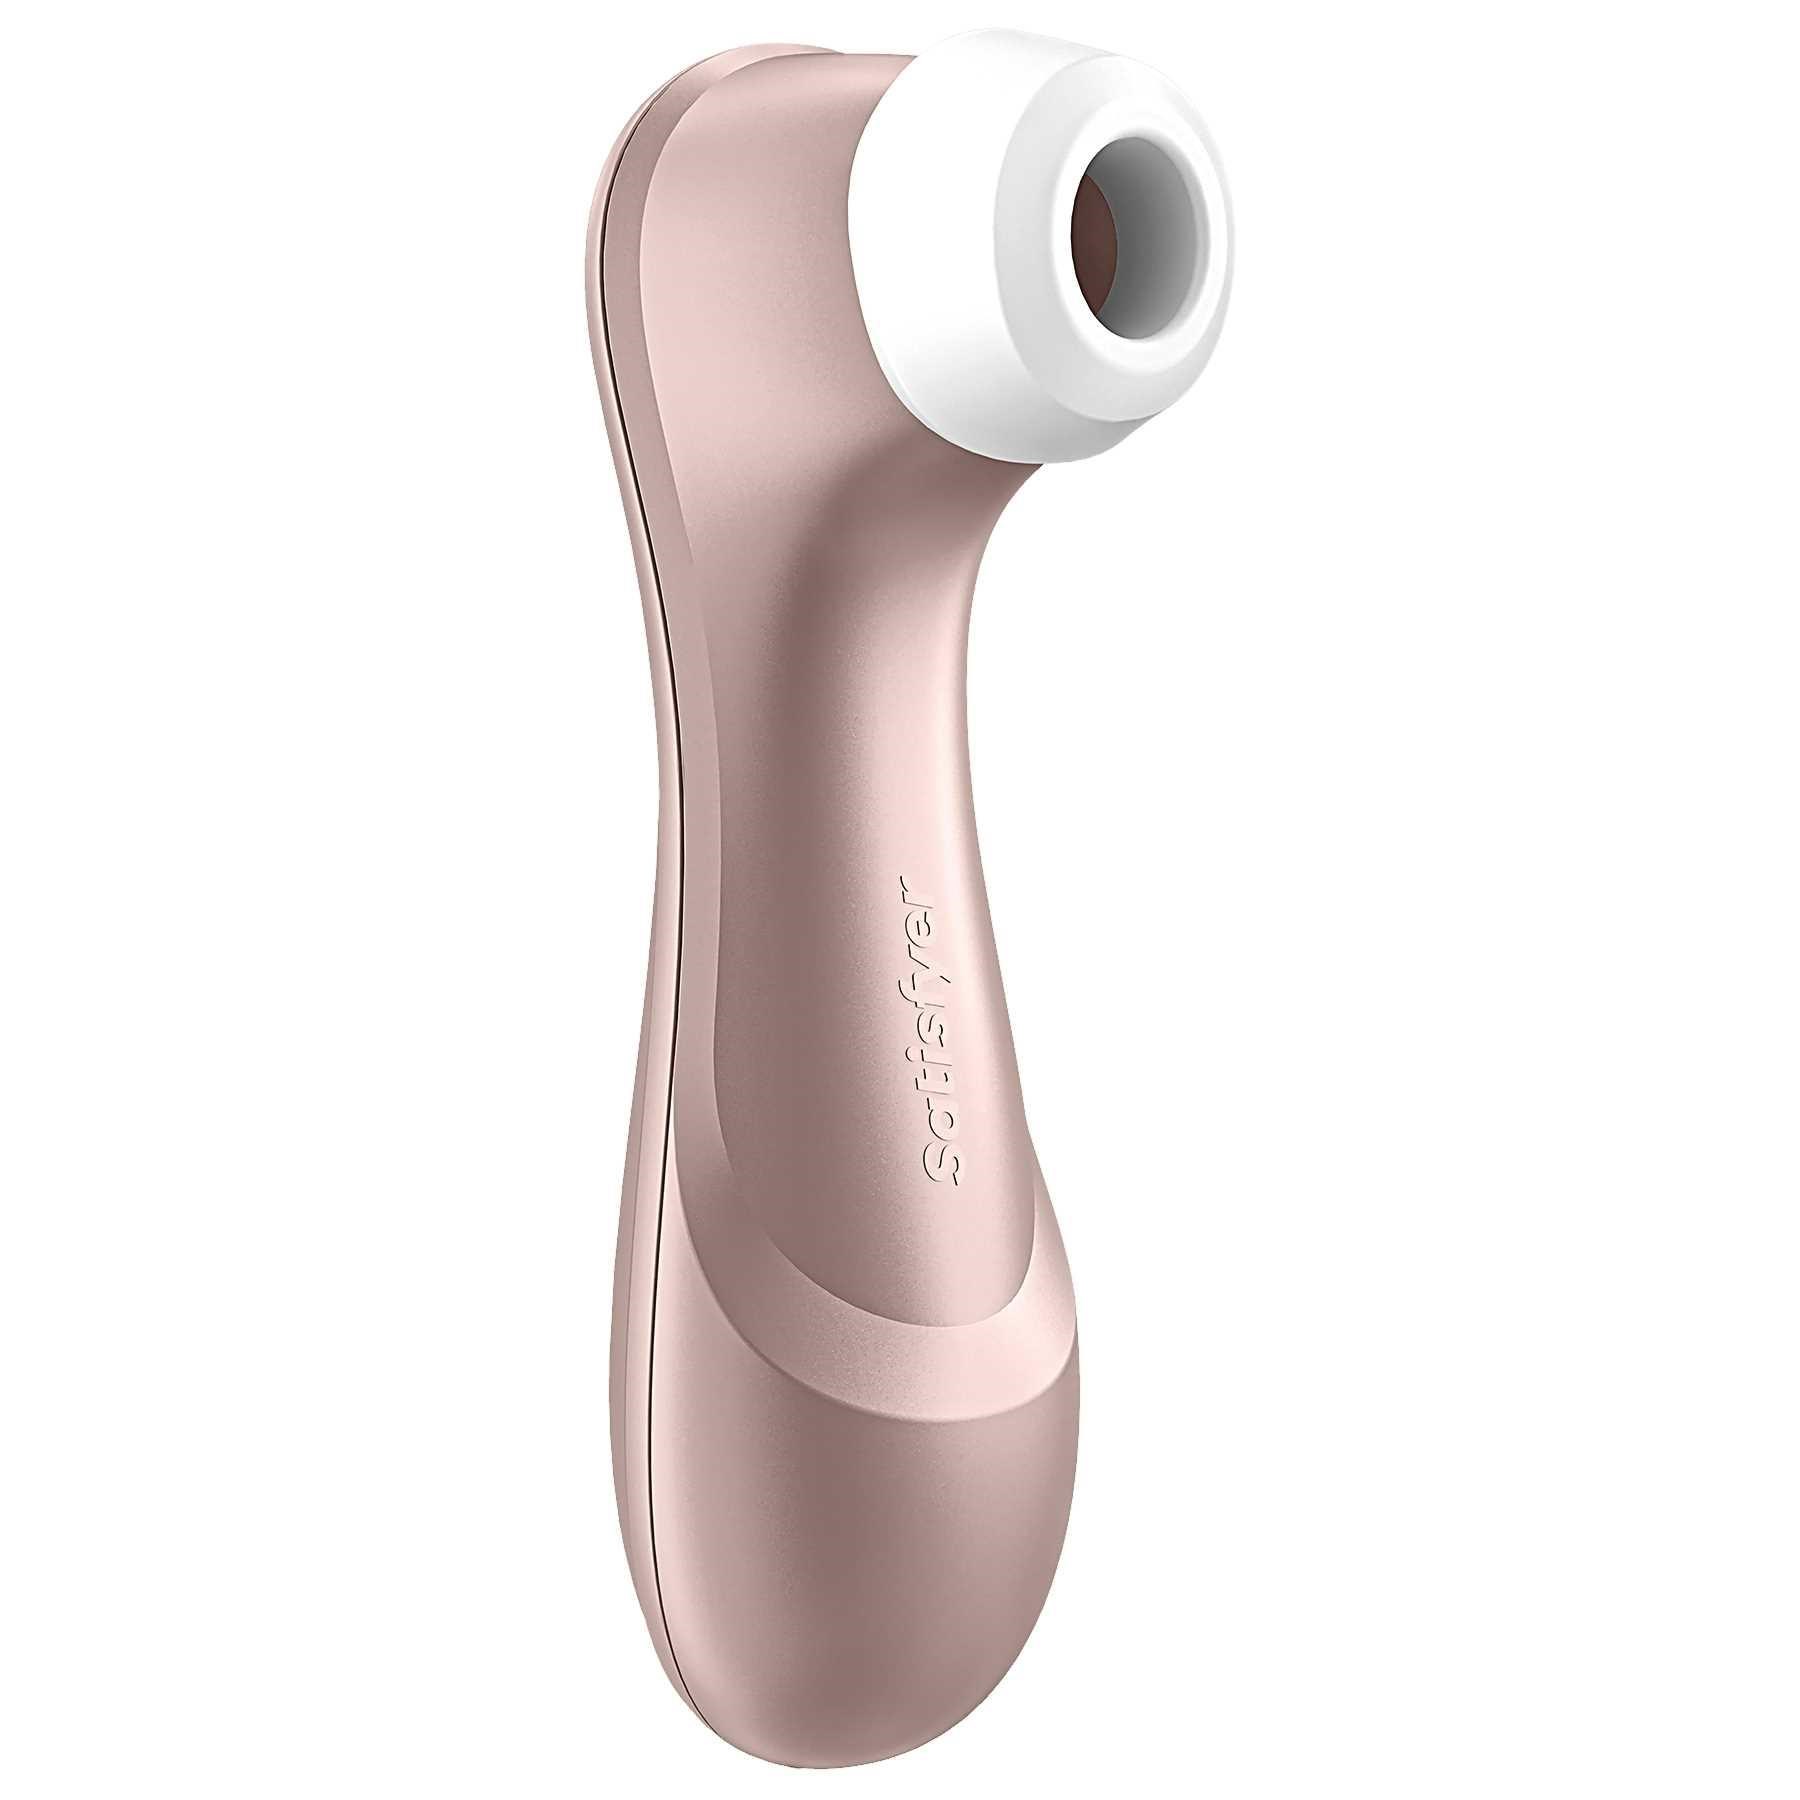 Satisfyer Pro 2 Clitoral Vibrator 2nd Generation pic